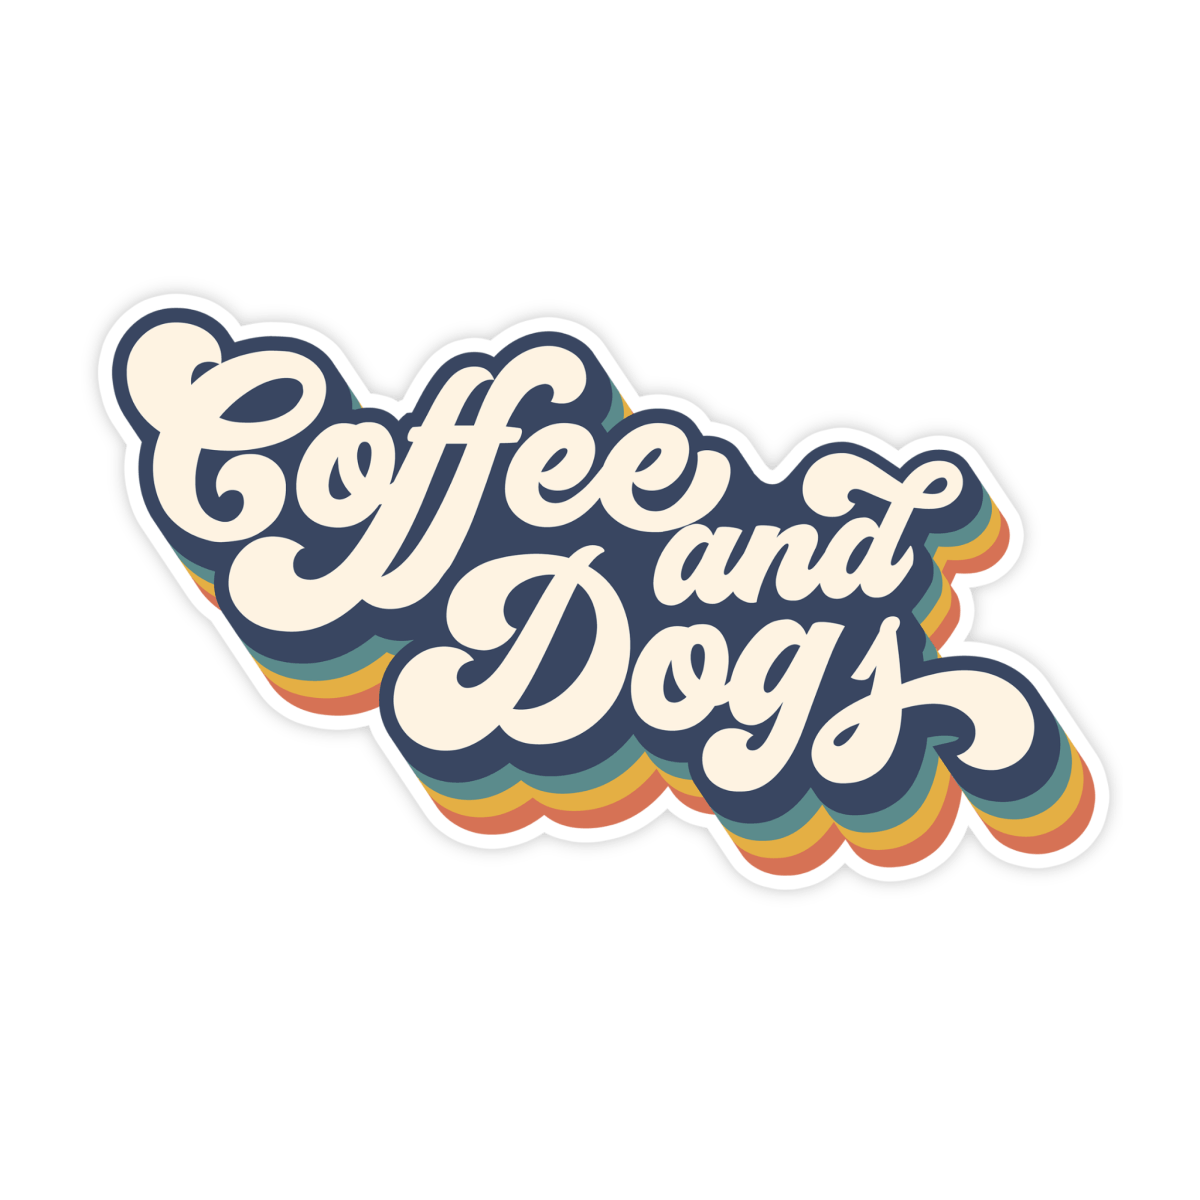 Coffee And Dogs Retro Vintage Sticker - stickerbullCoffee And Dogs Retro Vintage StickerRetail StickerstickerbullstickerbullCoffeeDogs_#28Coffee And Dogs Retro Vintage Sticker